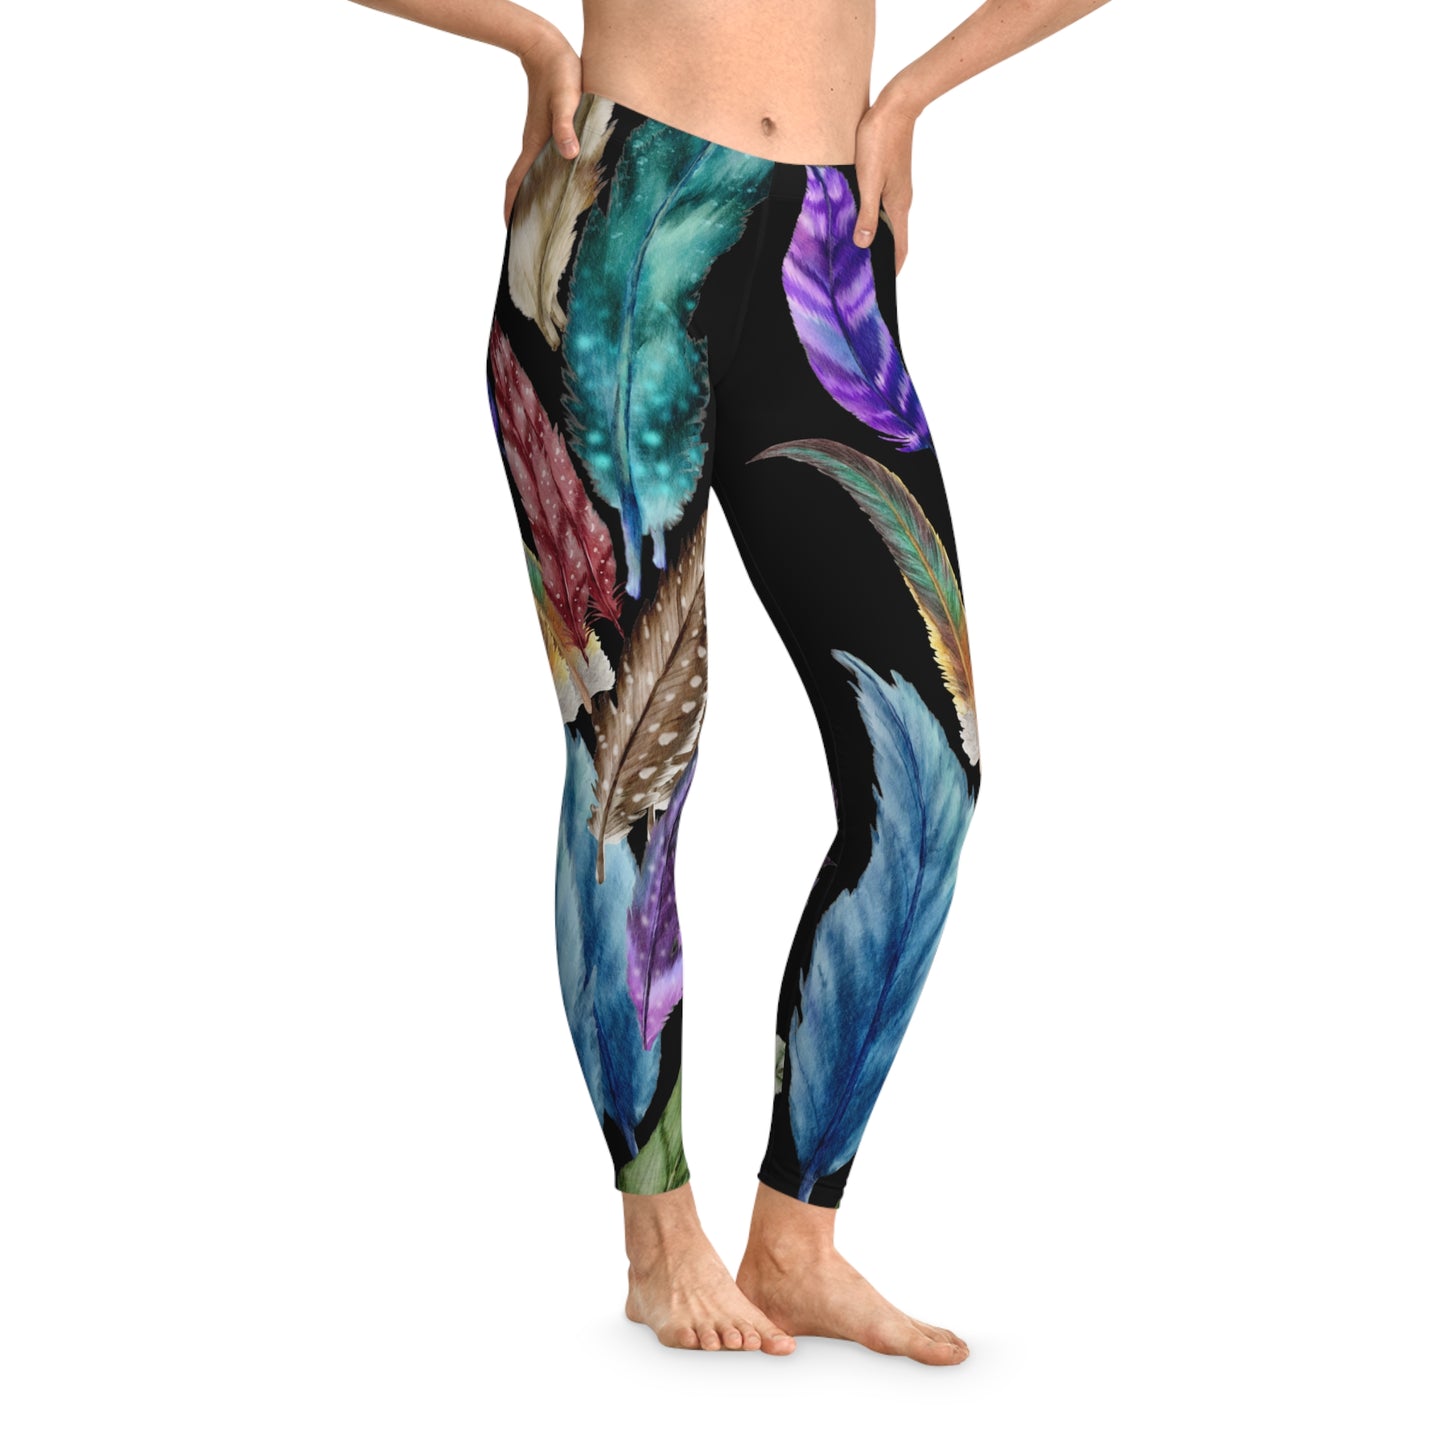 Feathers - Stretchy Leggings